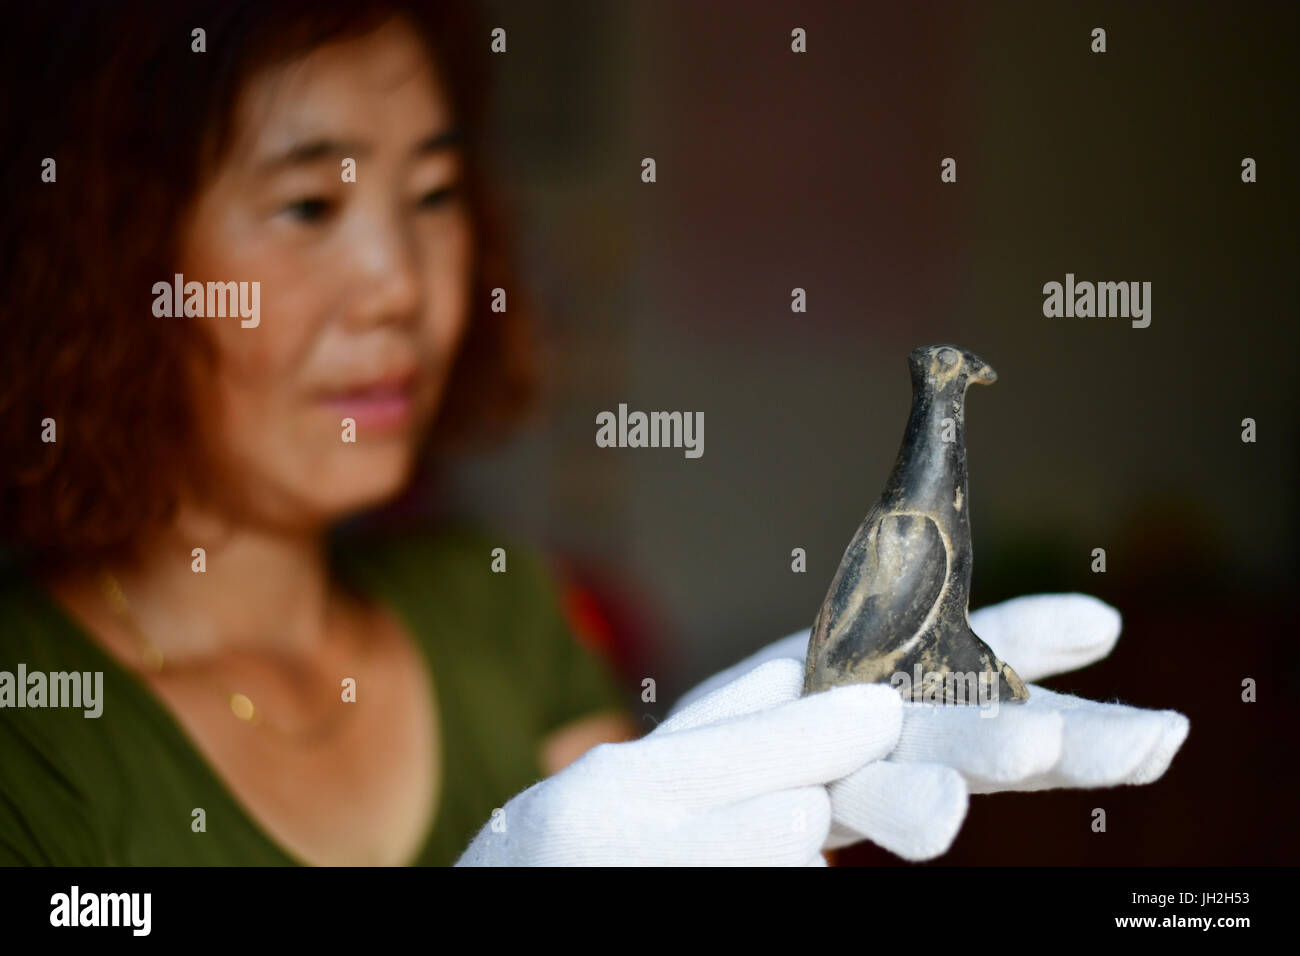 (170712) -- ZHENGZHOU, July 12, 2017 (Xinhua) -- A staff member of Chinese Academy of Social Sciences shows a pottery bird statue in Xinmi, central China's Henan Province, July 10, 2017. Carbon dating has recently confirmed the age of the 3,800-year-old red pottery bird statue, unearthed at the ruins of the city of Xinzhai in Henan Province. The ruins was discovered in 1979 and believed to be founded by Qi, king during the Xia Dynasty, as early as 2050 BC. The statue, 16 cm long and 7 cm tall, was painted red with cinnabar, which suggests it may have been an item of worship, according to arche Stock Photo